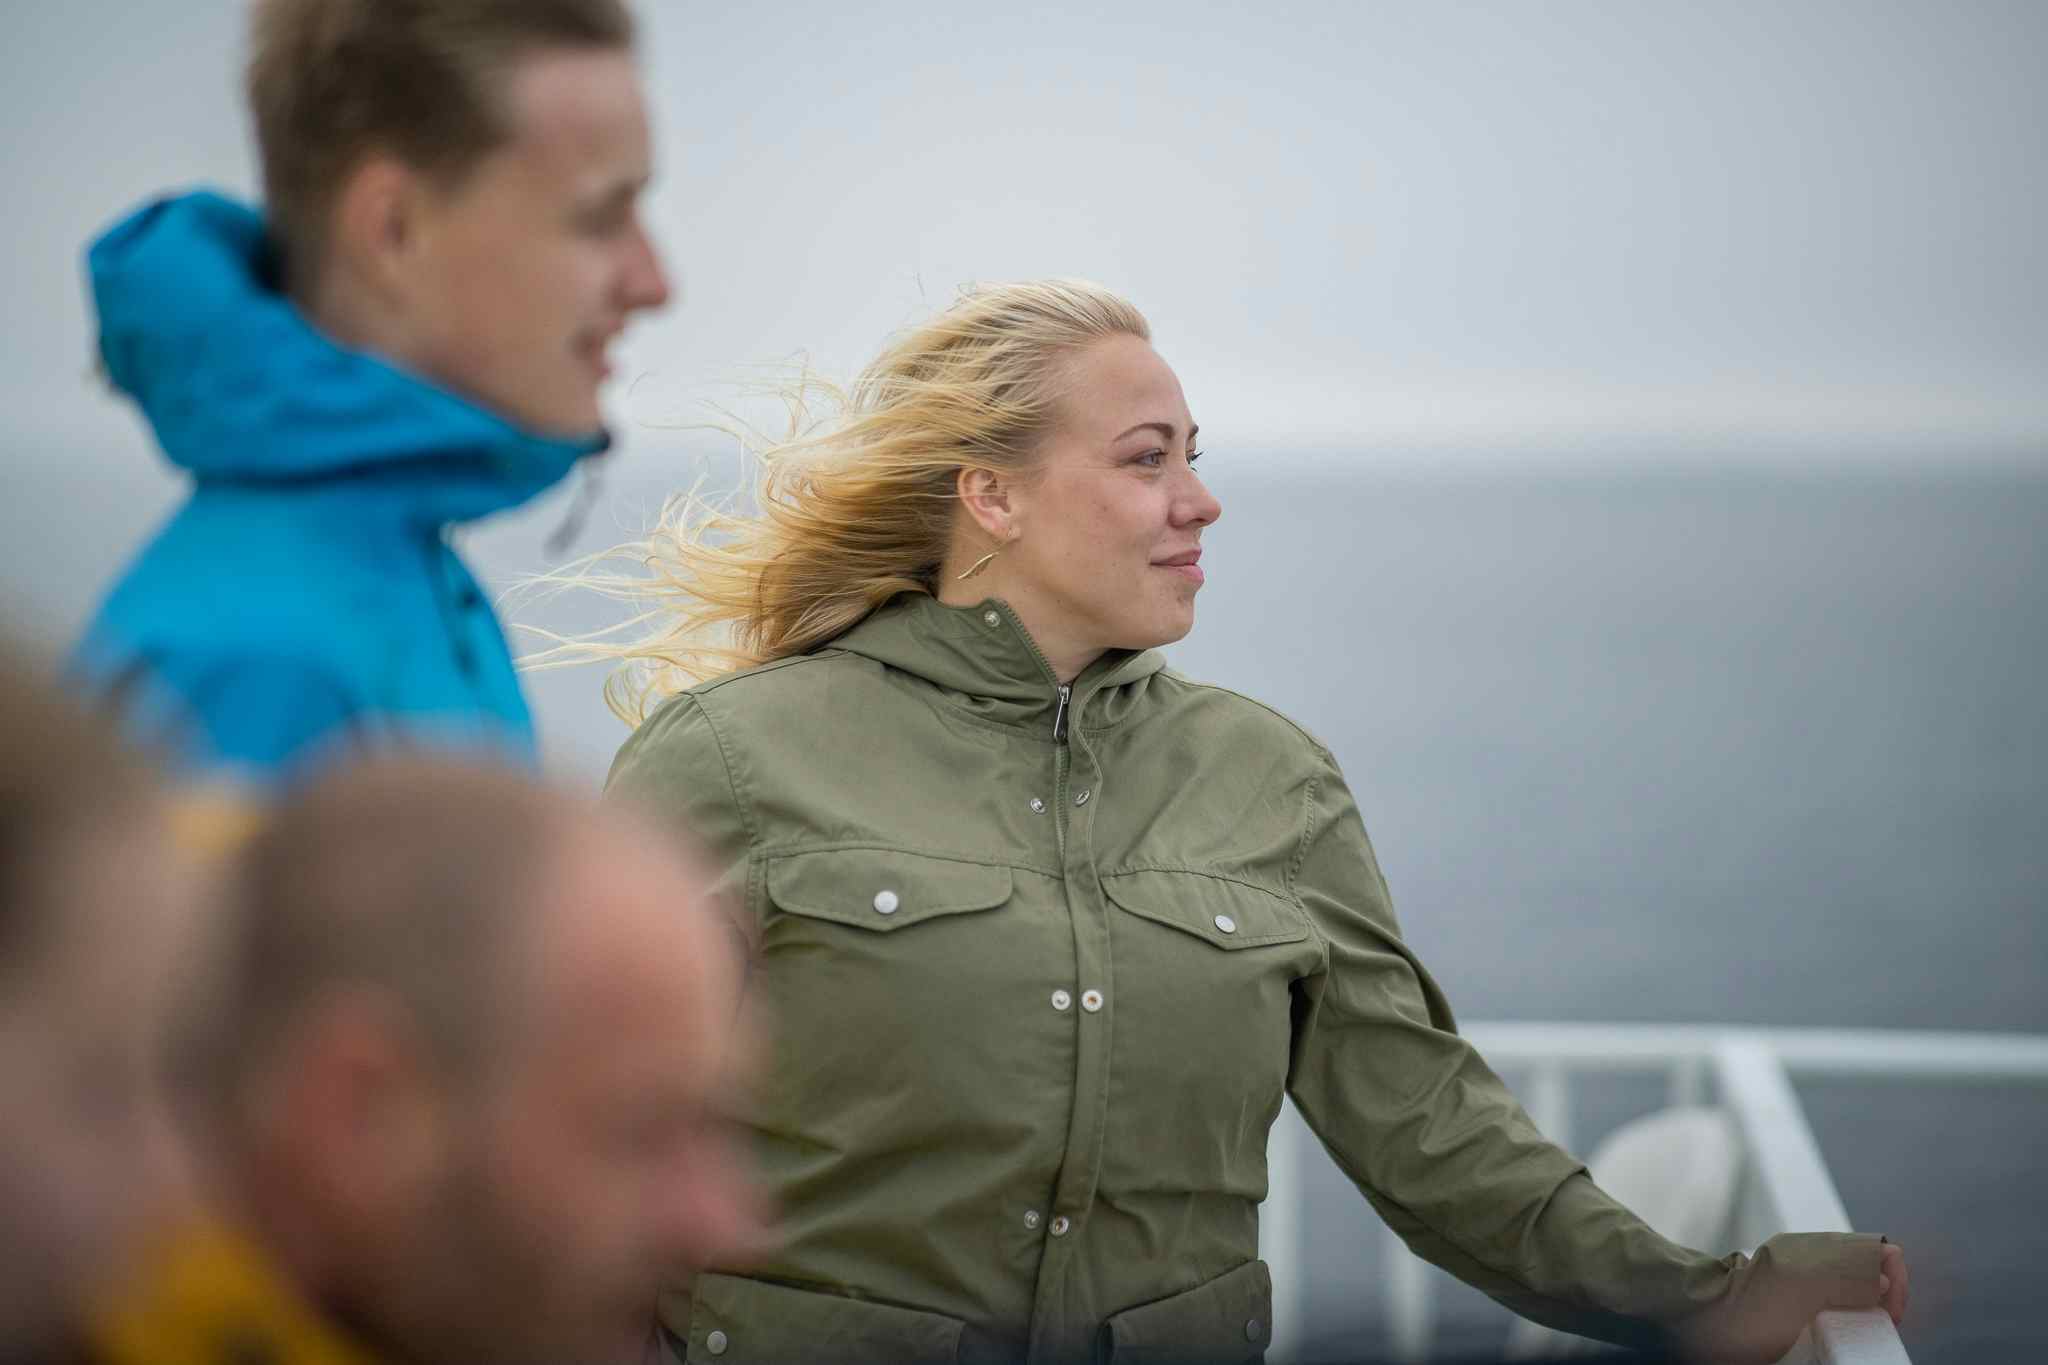 Group of people on a ferry. Standing on deck with the wind in their hair